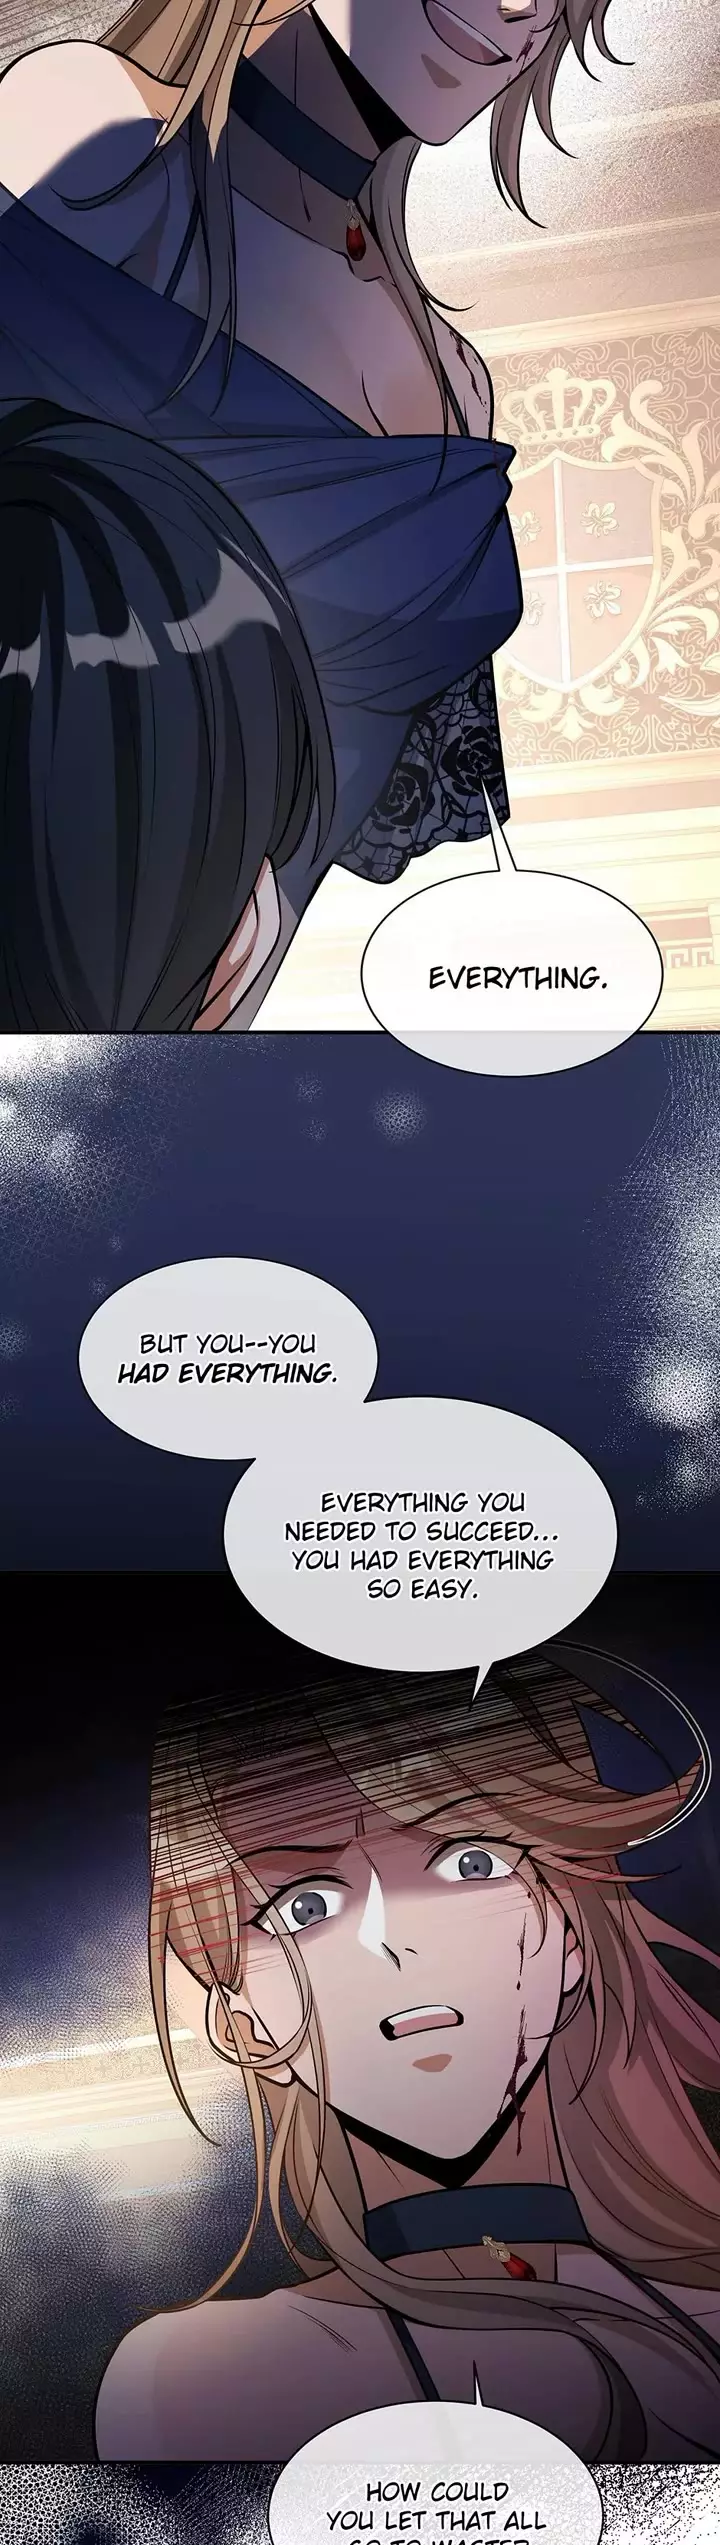 The Beginning After The End: Side Story - Jasmine: Wind-Borne - 5 page 29-2f46a236